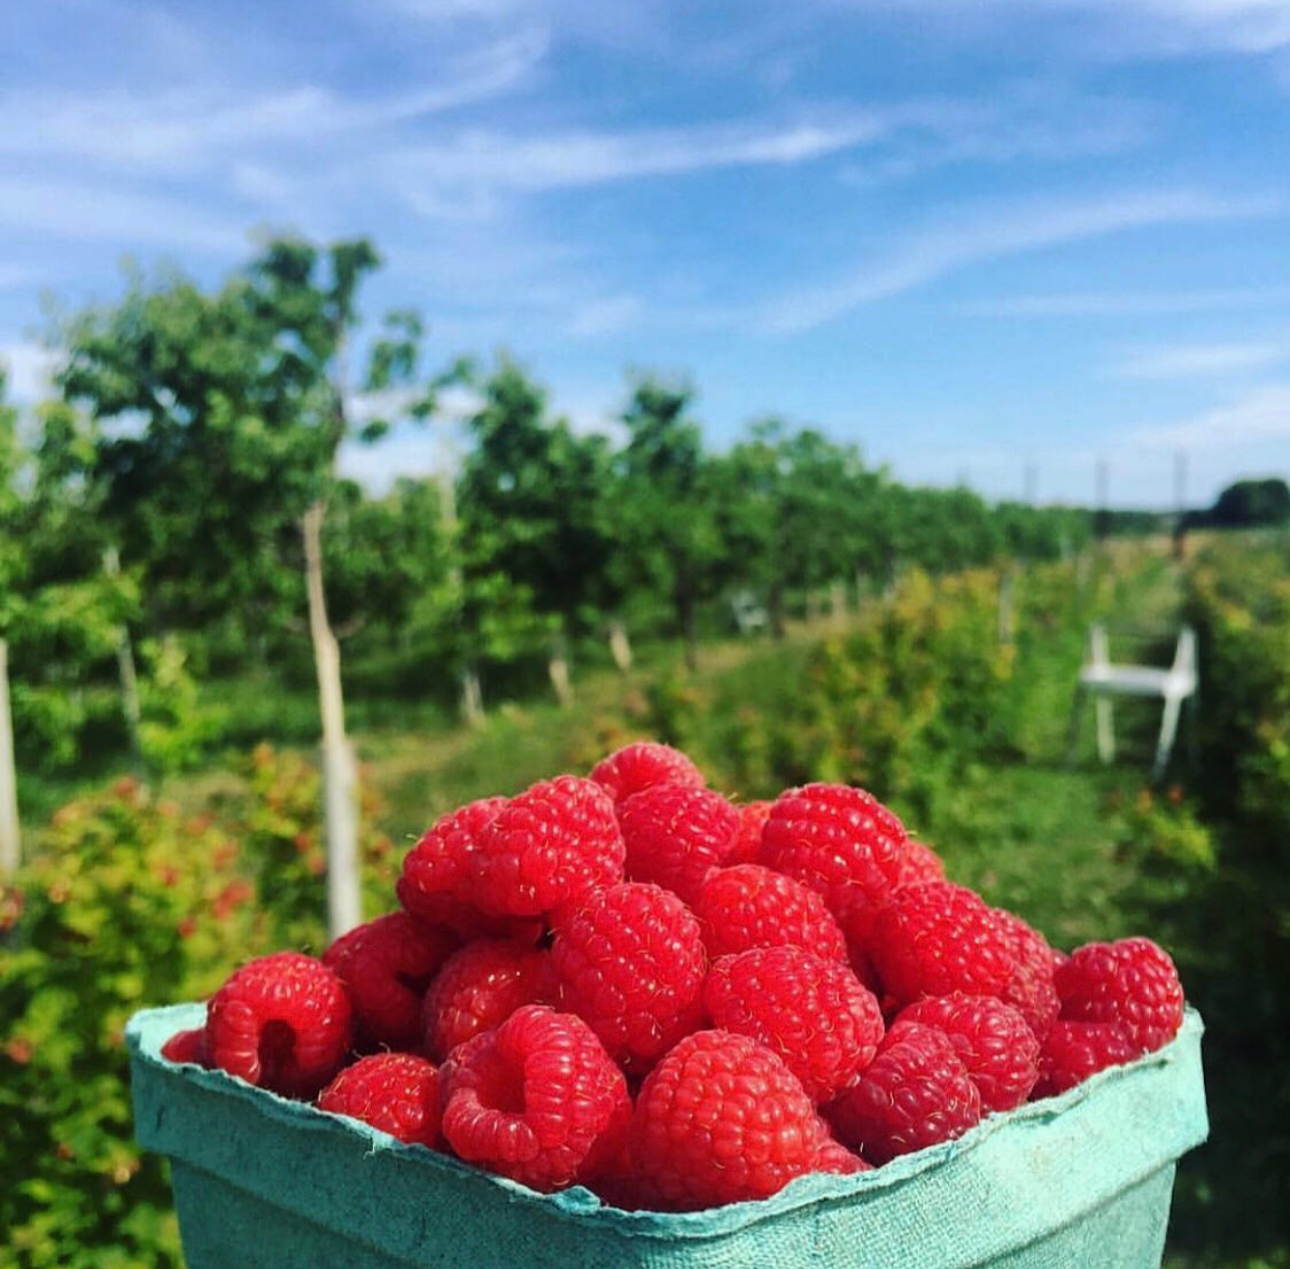 Image of a pint of raspberries with a pick-your-own raspberry patch in the background